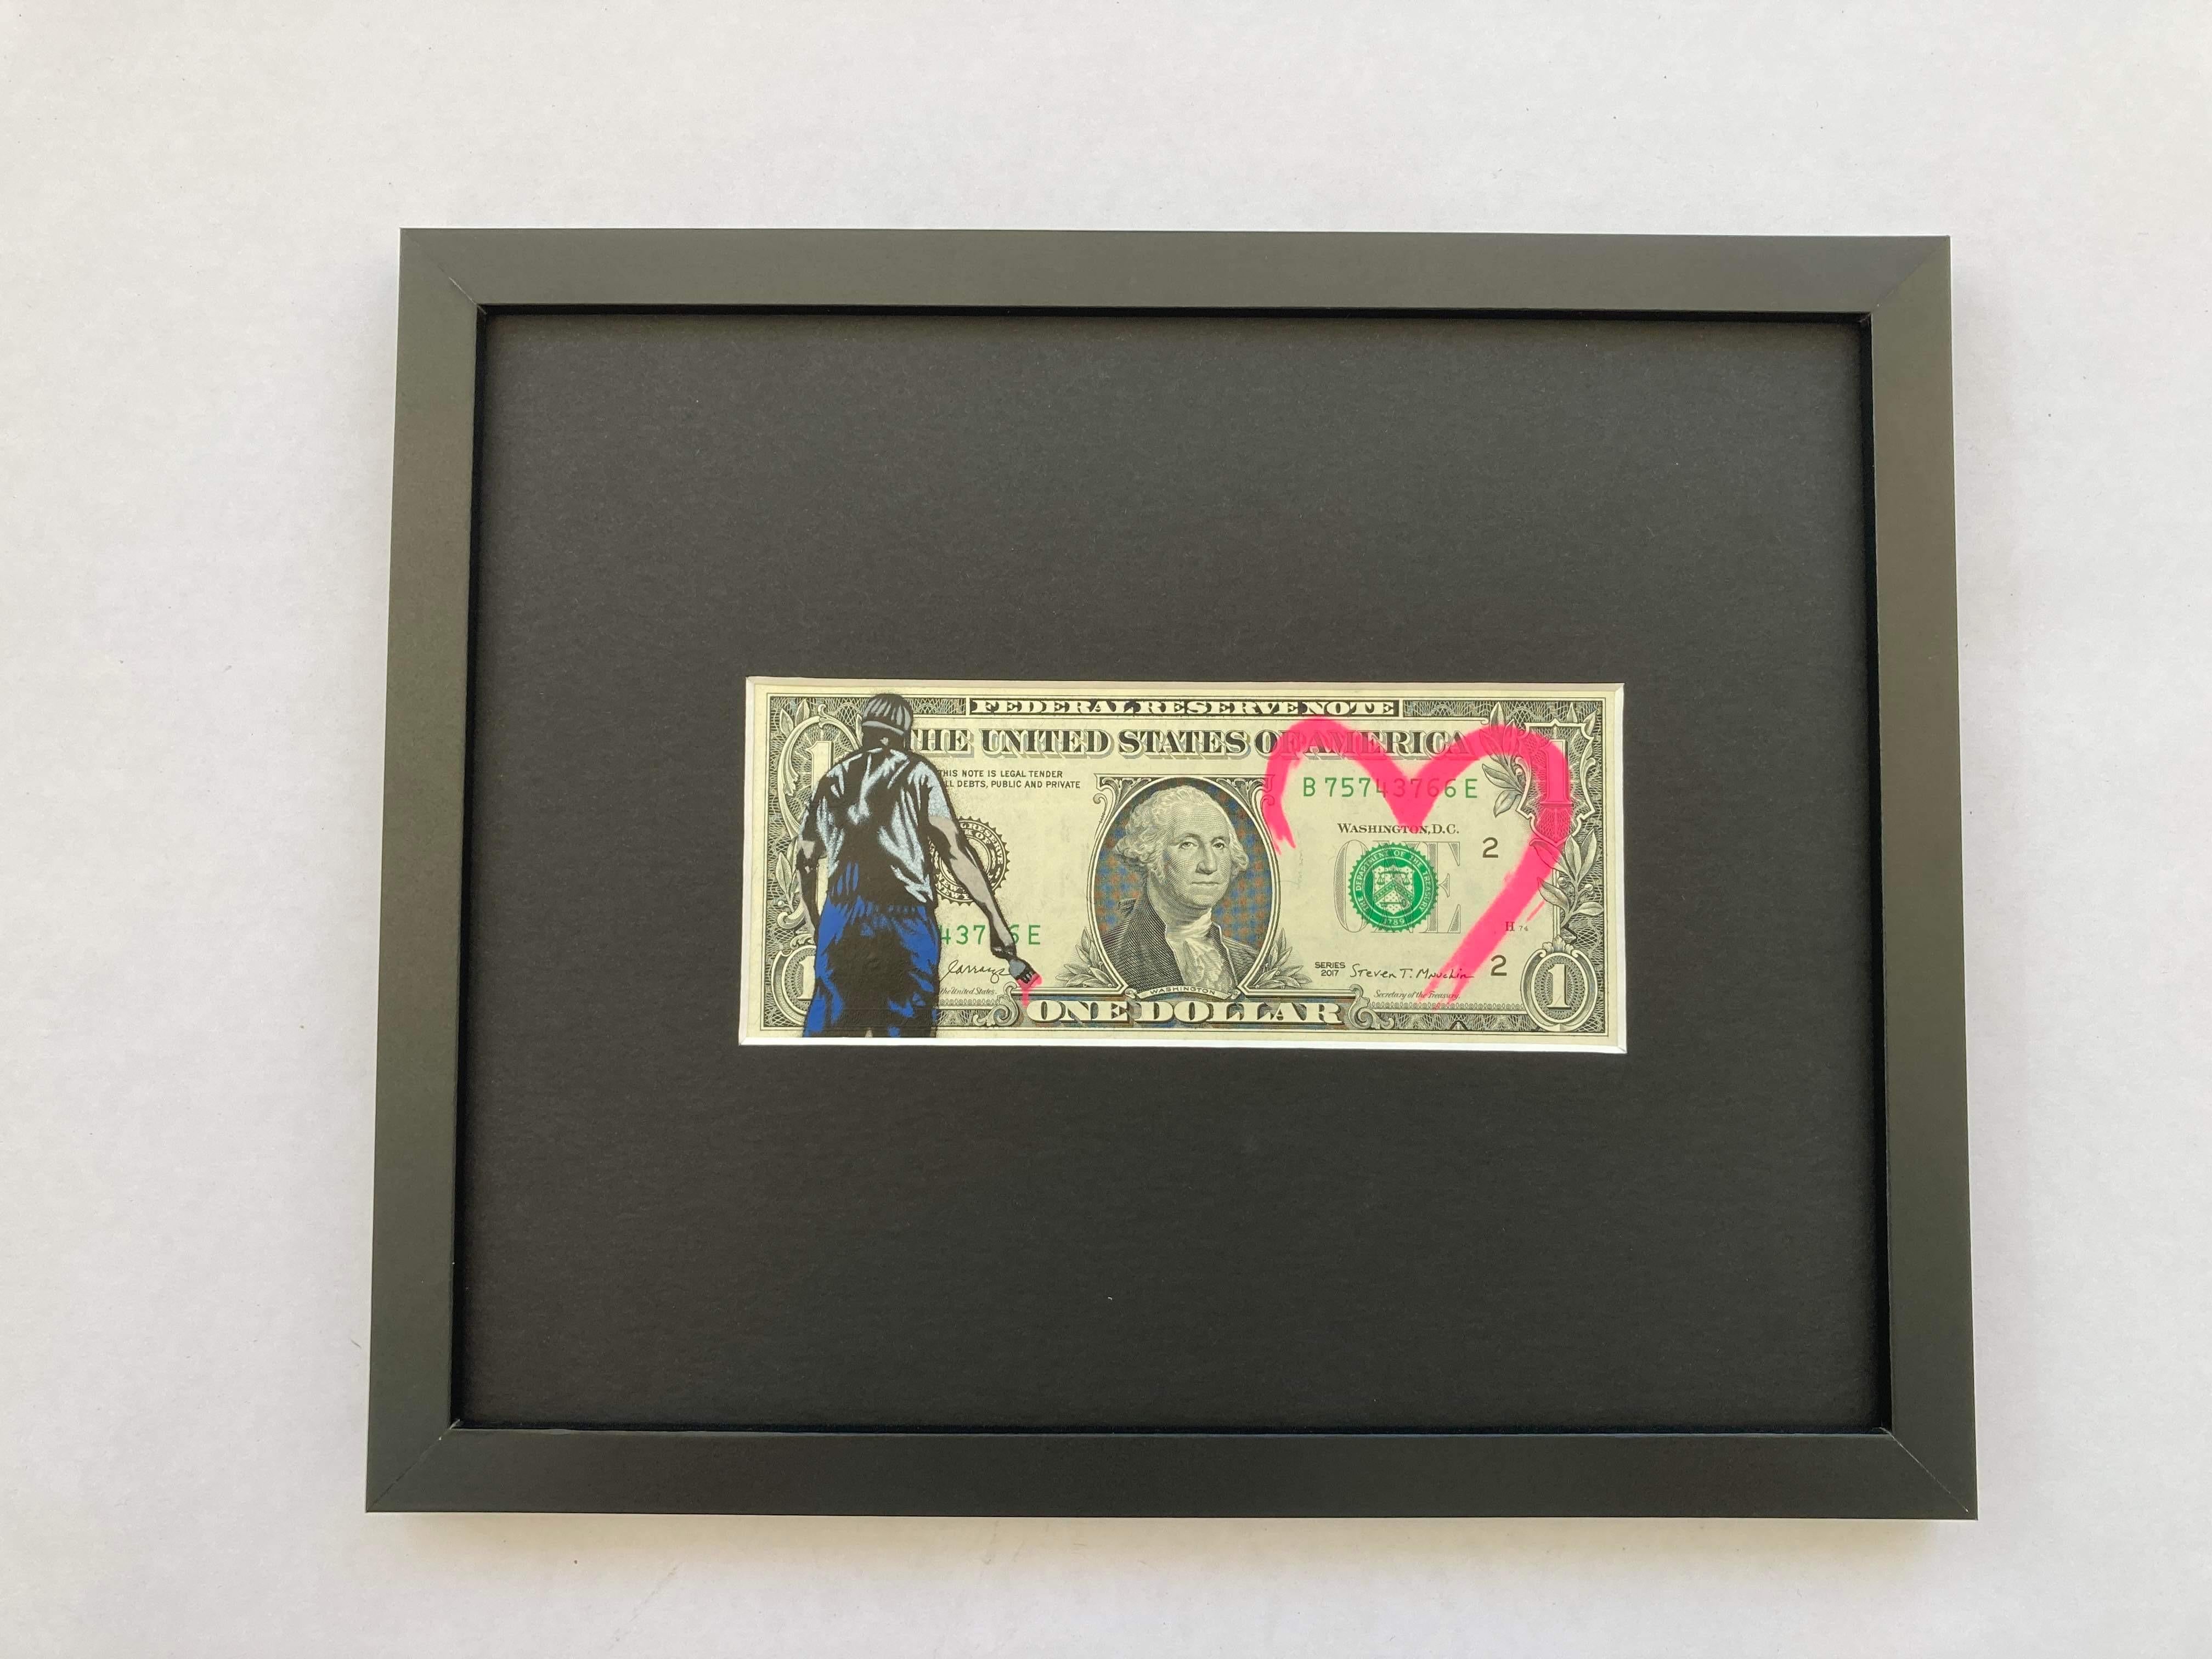 Edition version – fluorescent pink love heart edition on genuine $1 bill in mounted frame.

Surface –  $1 bill

Edition size – edition of 5

Size – n/a

Year – 2023

Description – 6 color stencil and spray paint on $1 bill mounted in frame –